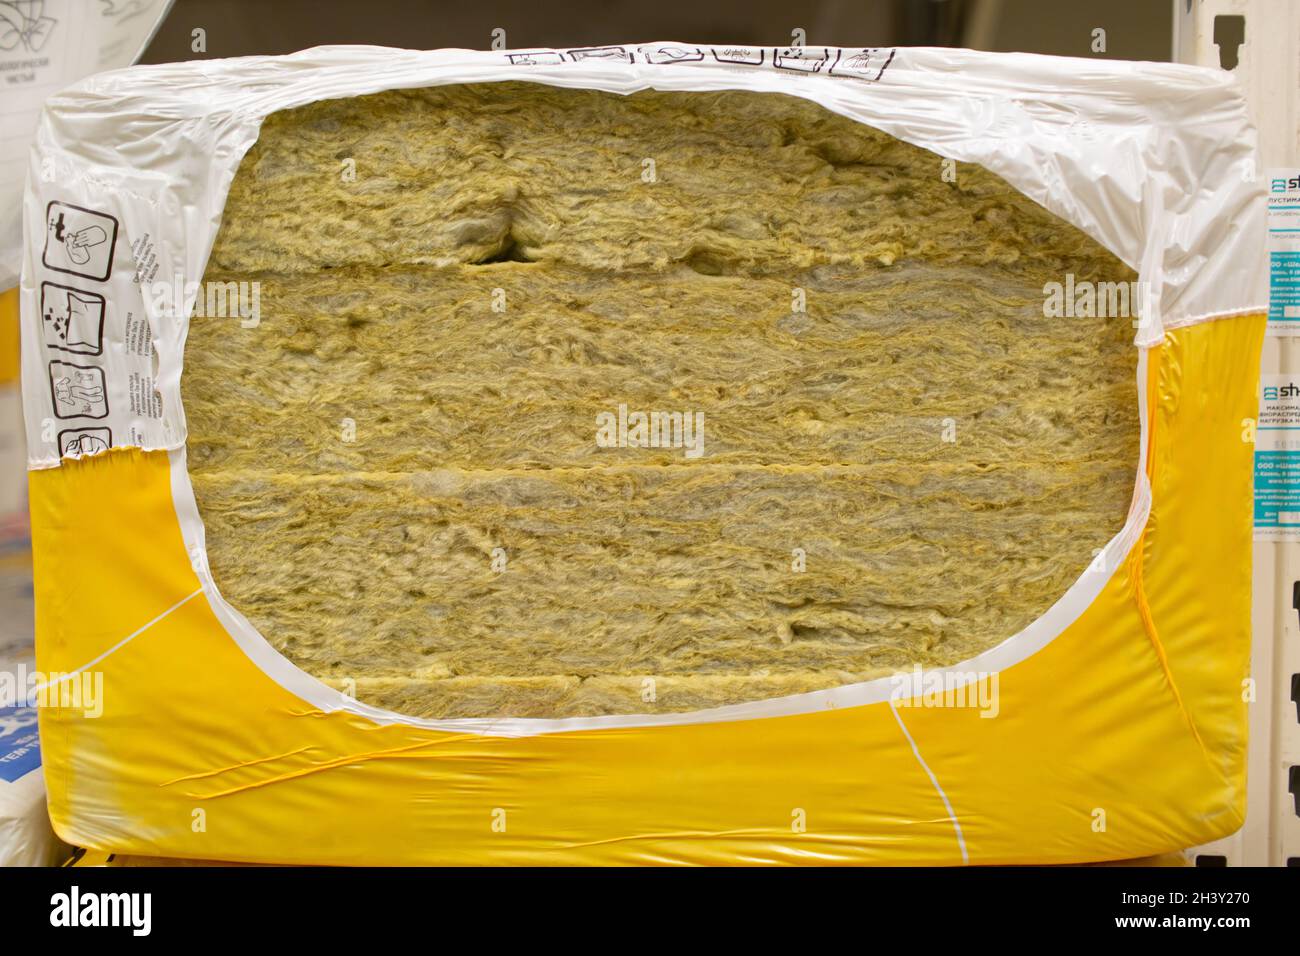 Closeup Of Roll Of Fibreglass Insulation Material On White Stock